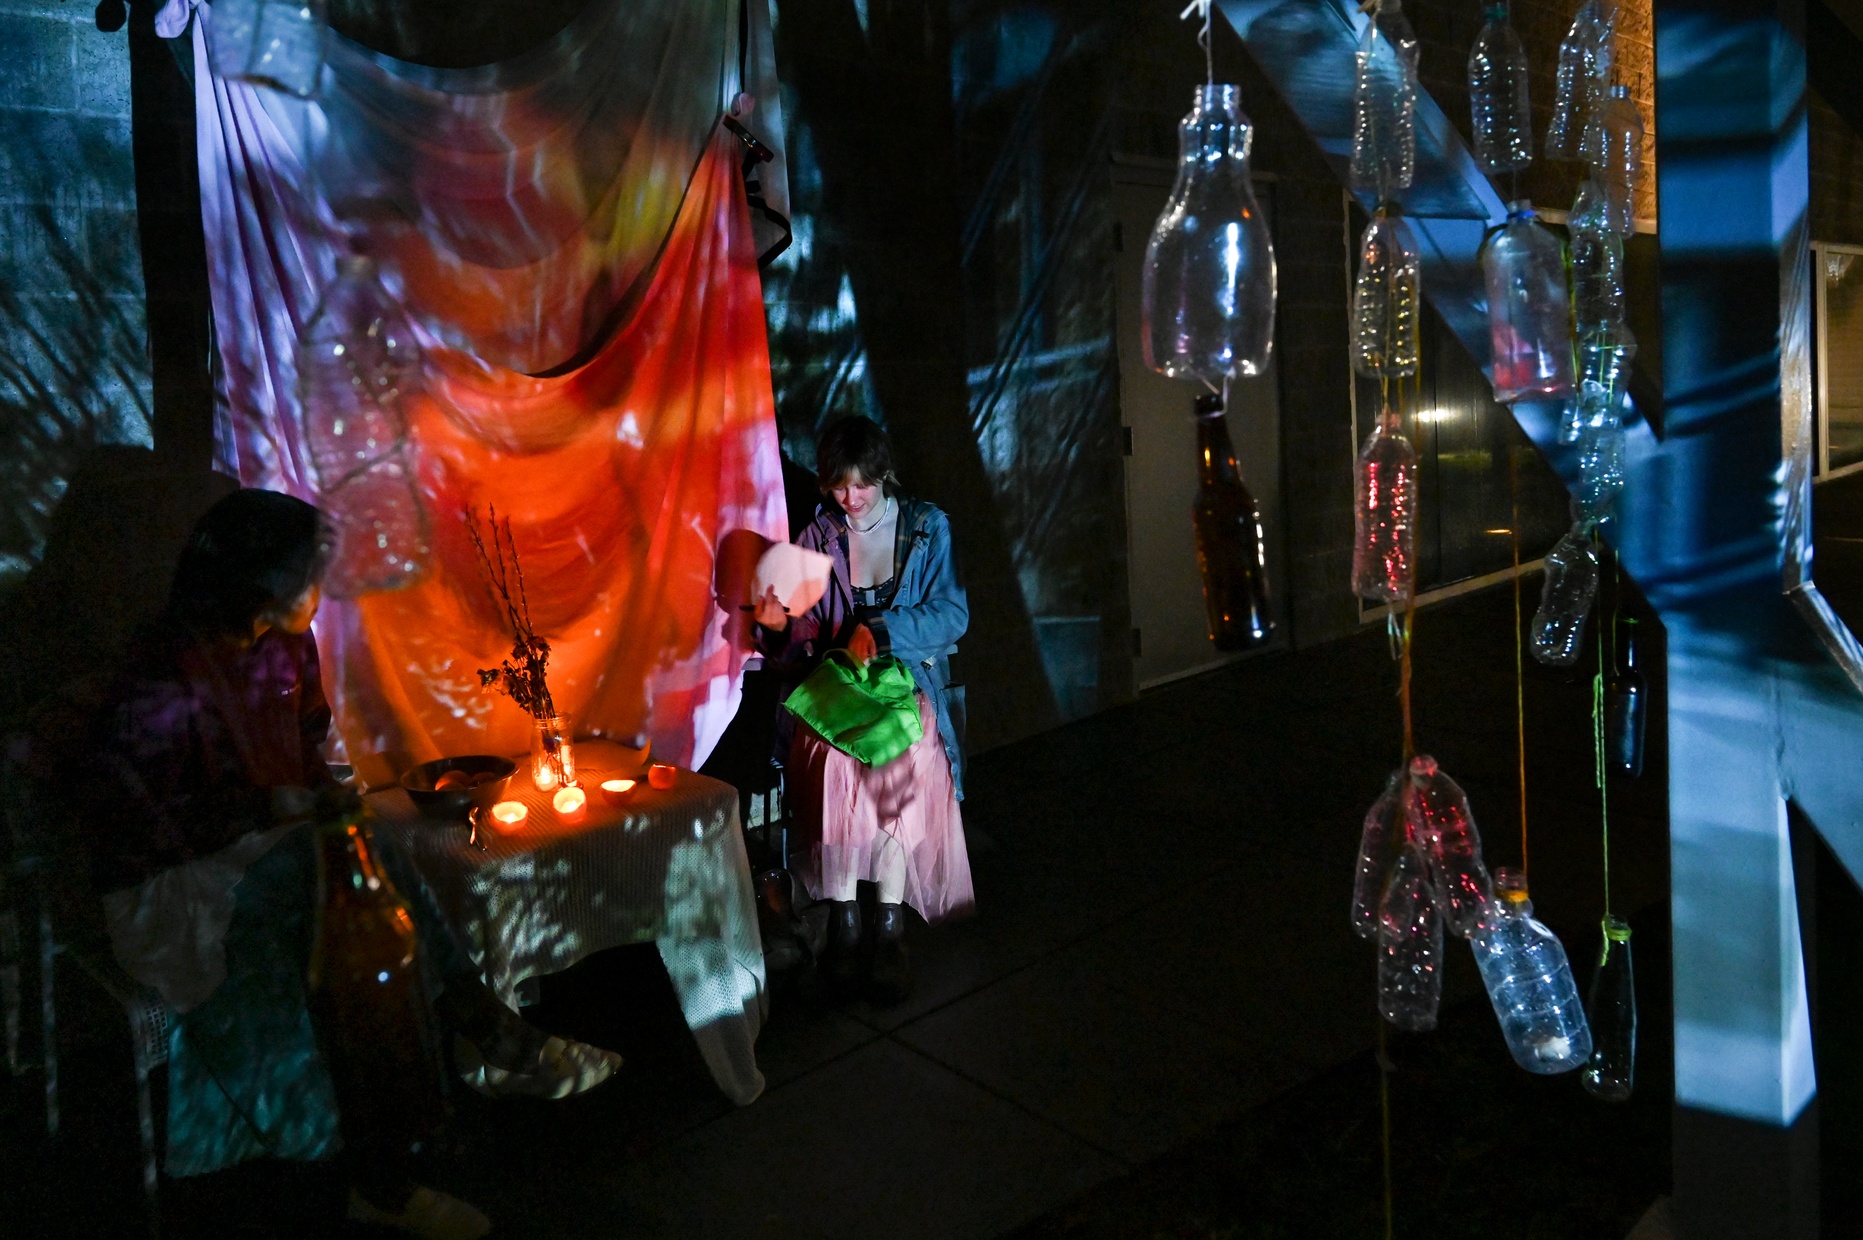 Two people sit in an art installation dimly lit with colorful lights and hanging bottles.